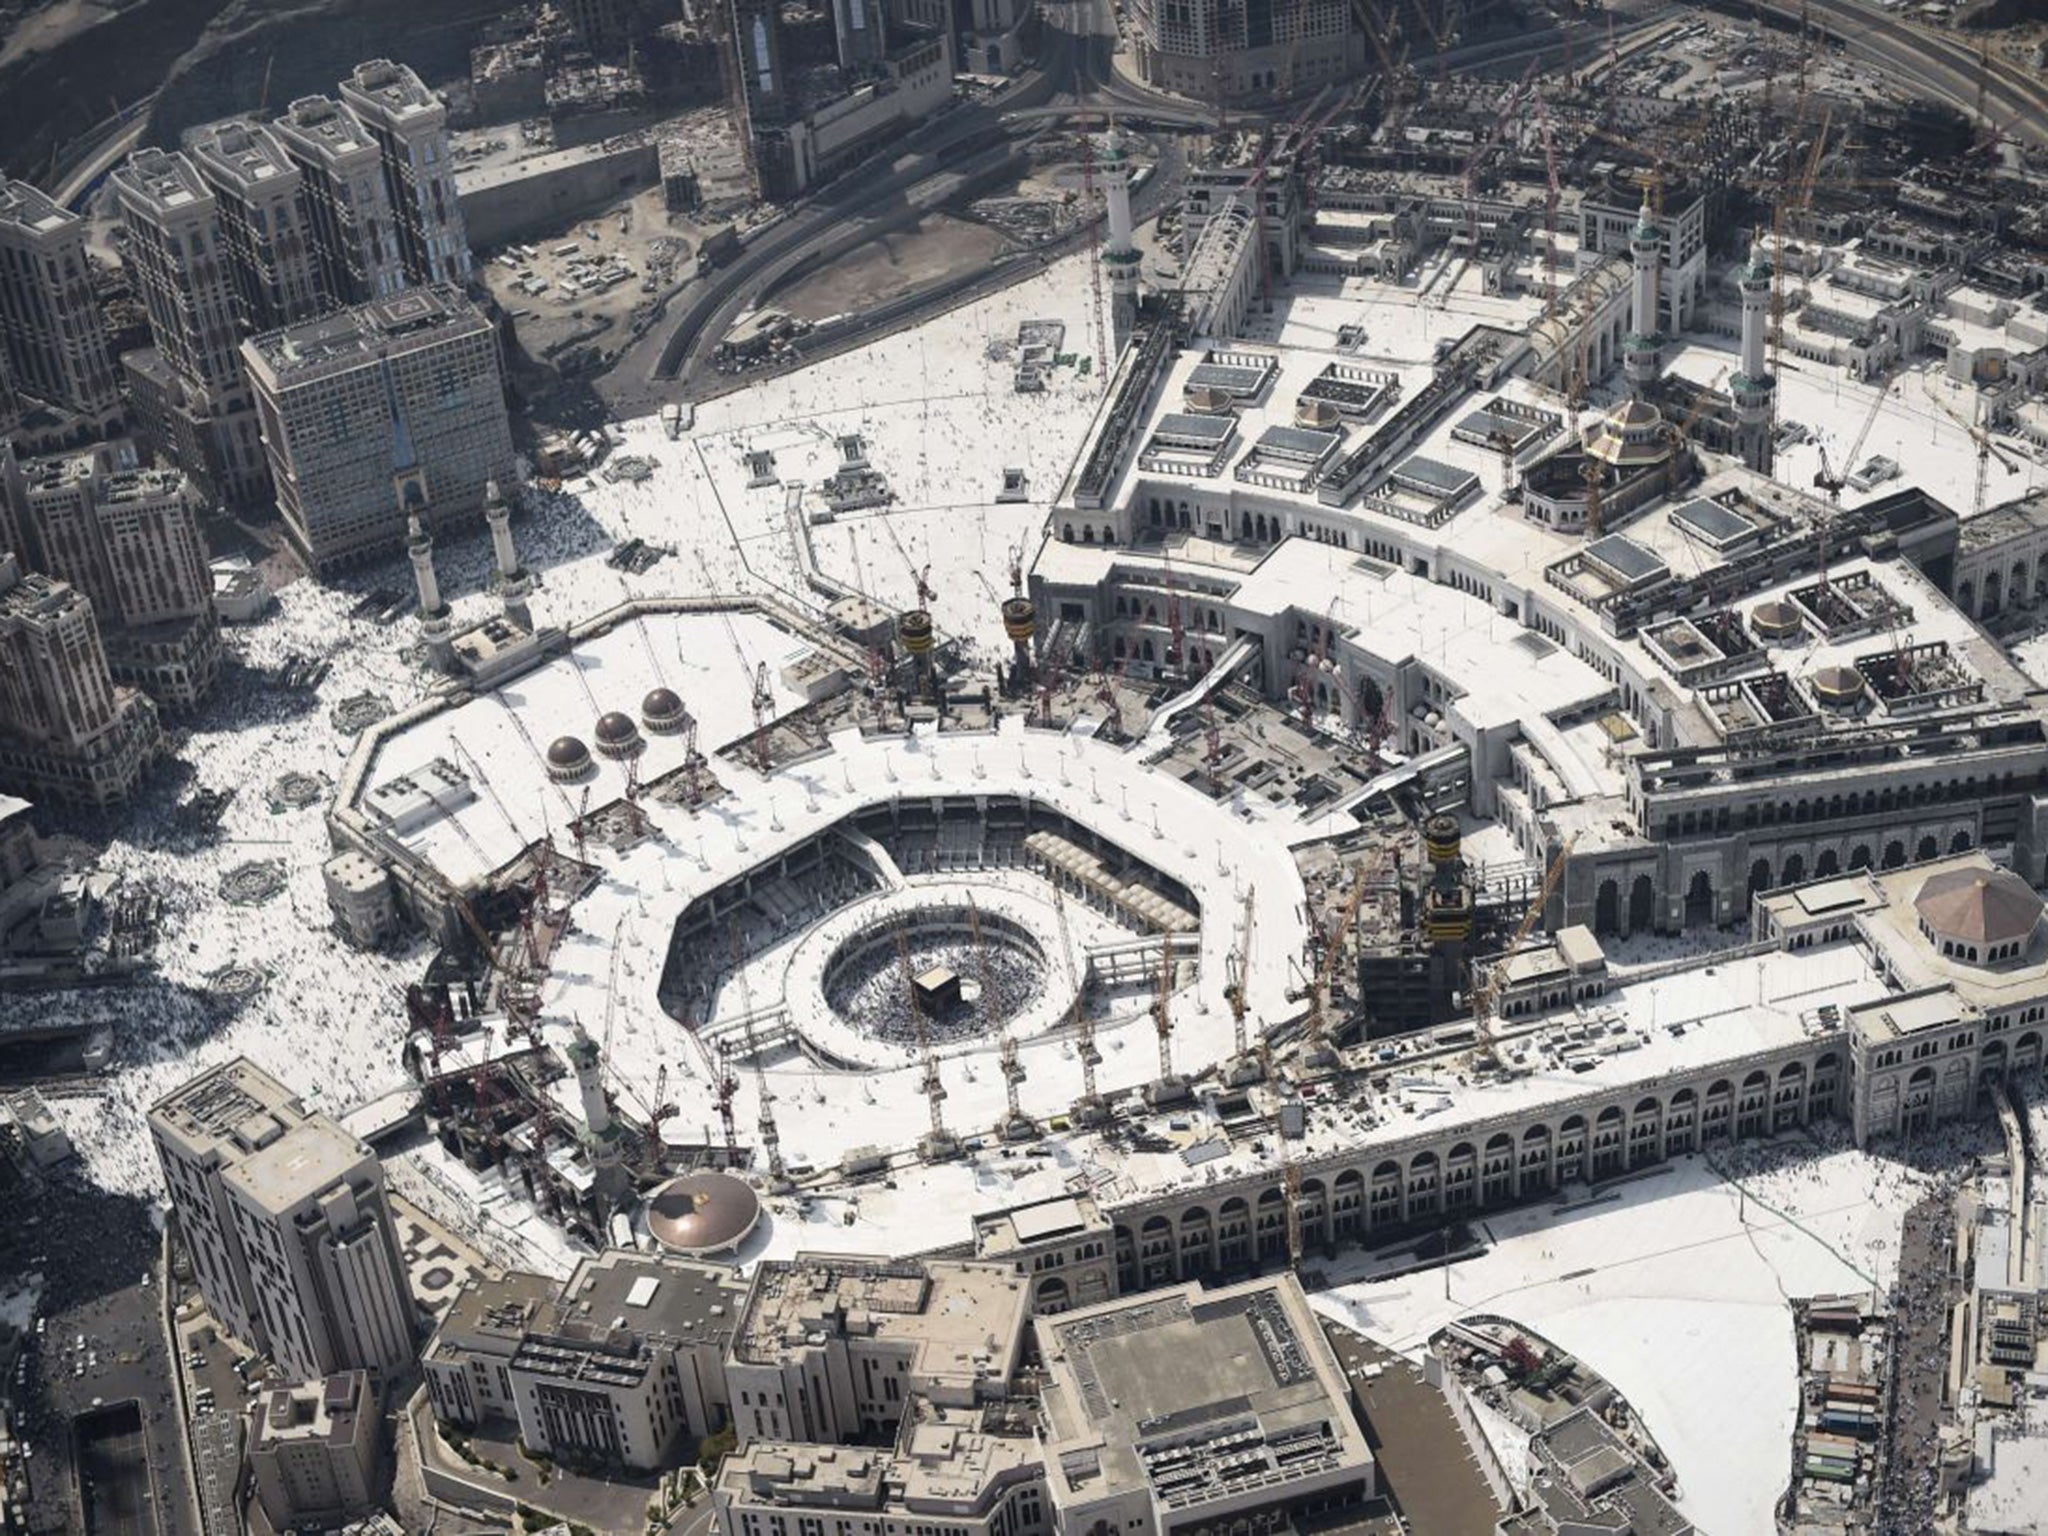 An aerial view shows the Grand mosque and Islam's holiest shrine, the Kaaba